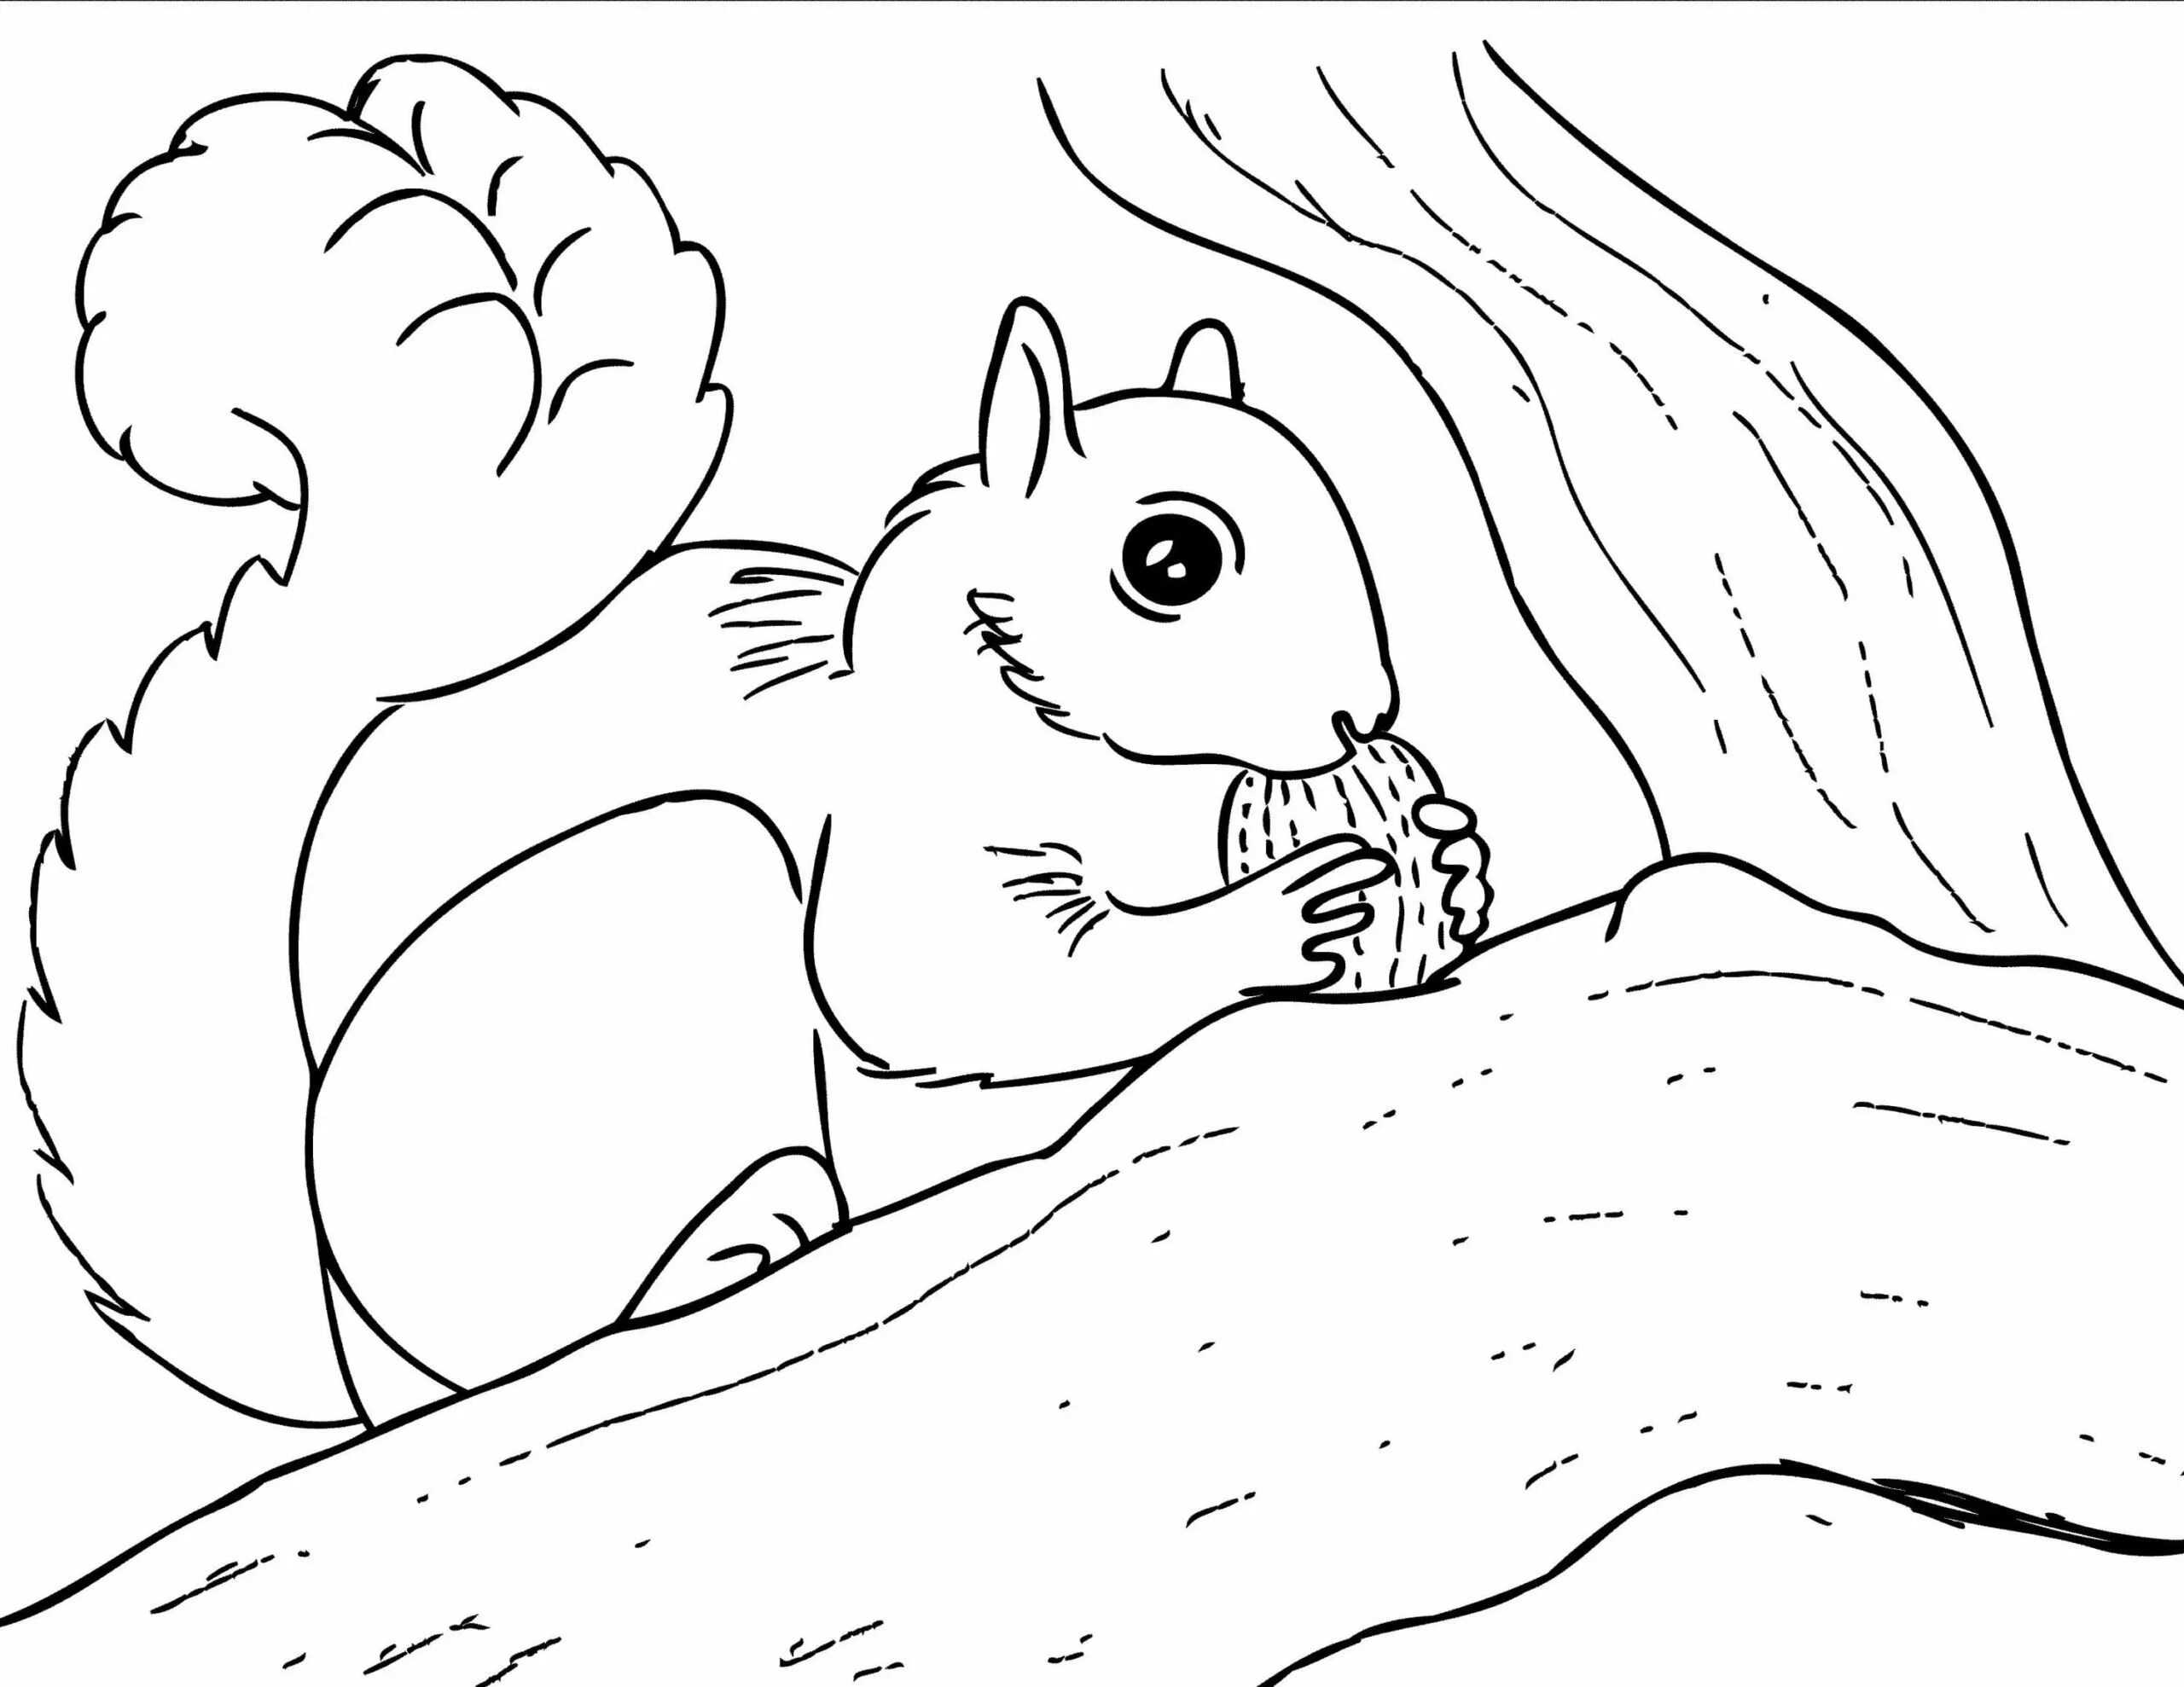 Squirrel in hollow #4